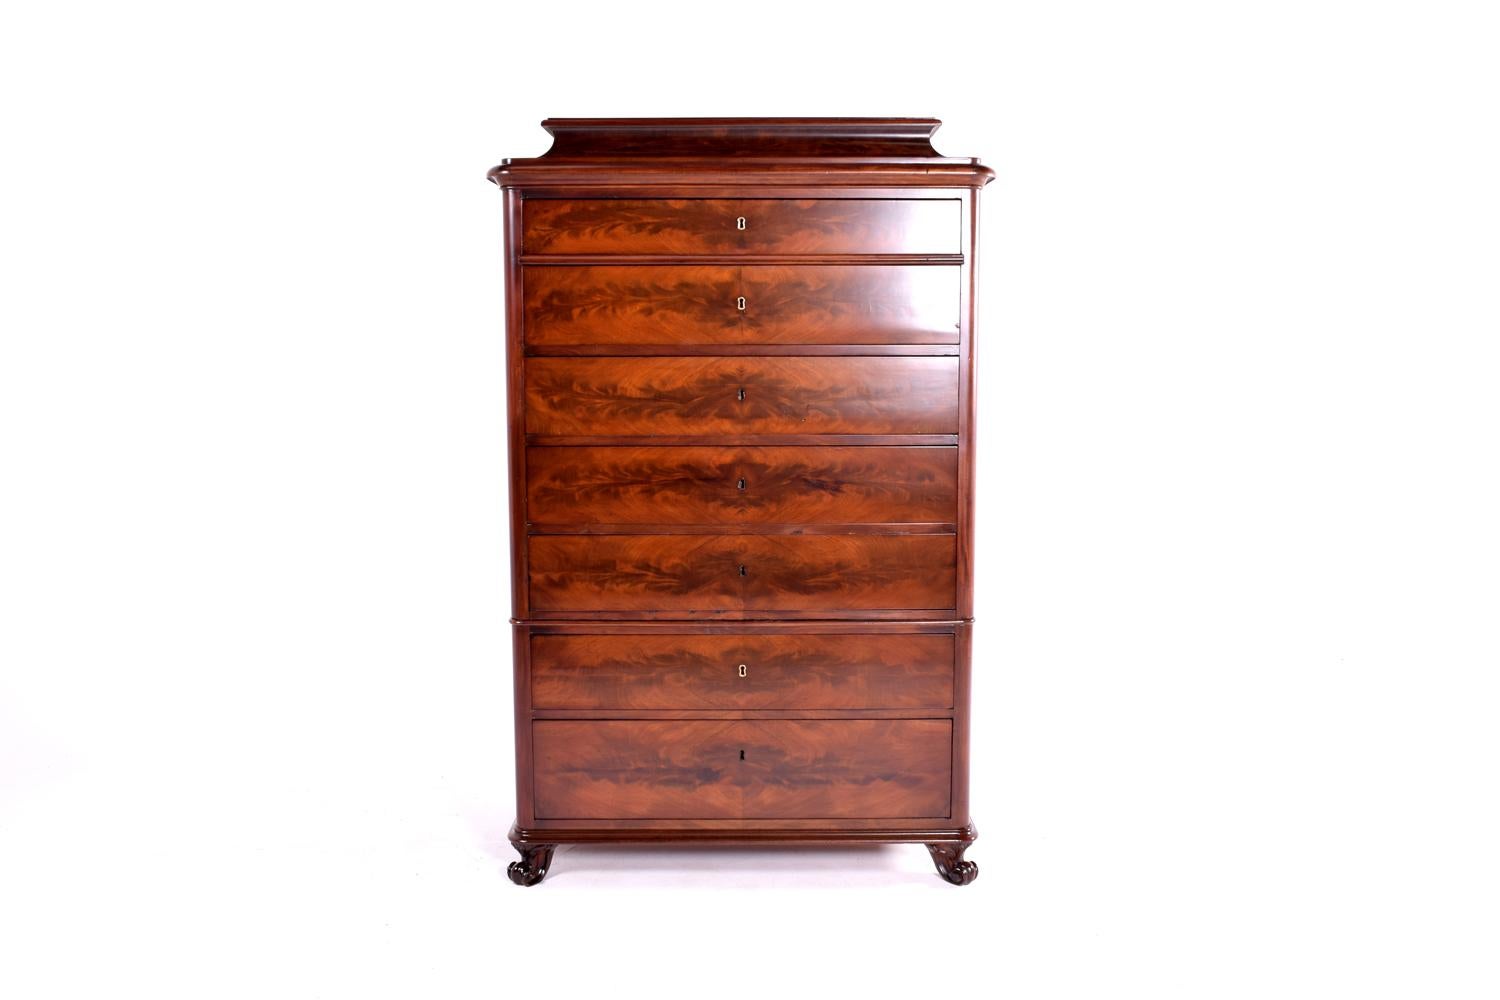 Mahogany flame veneer Danish Biedermeier Tallboy chest of drawers, form the 1850s-1960s.
With seven drawers, presumably one for each day of the week - 